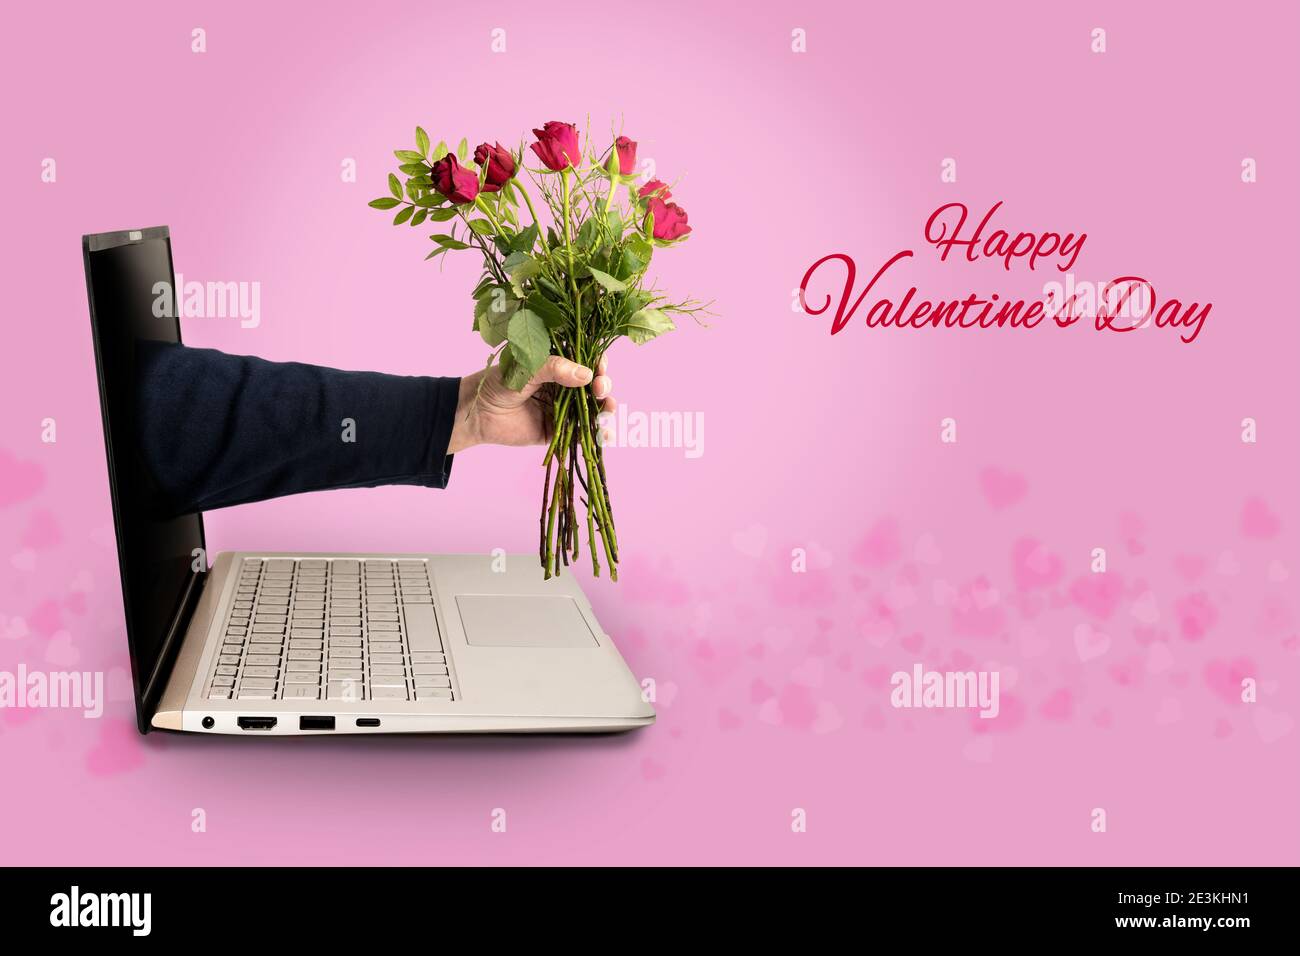 Hand of a man with a bouquet of roses coming out of a laptop screen, text Happy Valentines Day, love concept with social distance during covid-19 pand Stock Photo